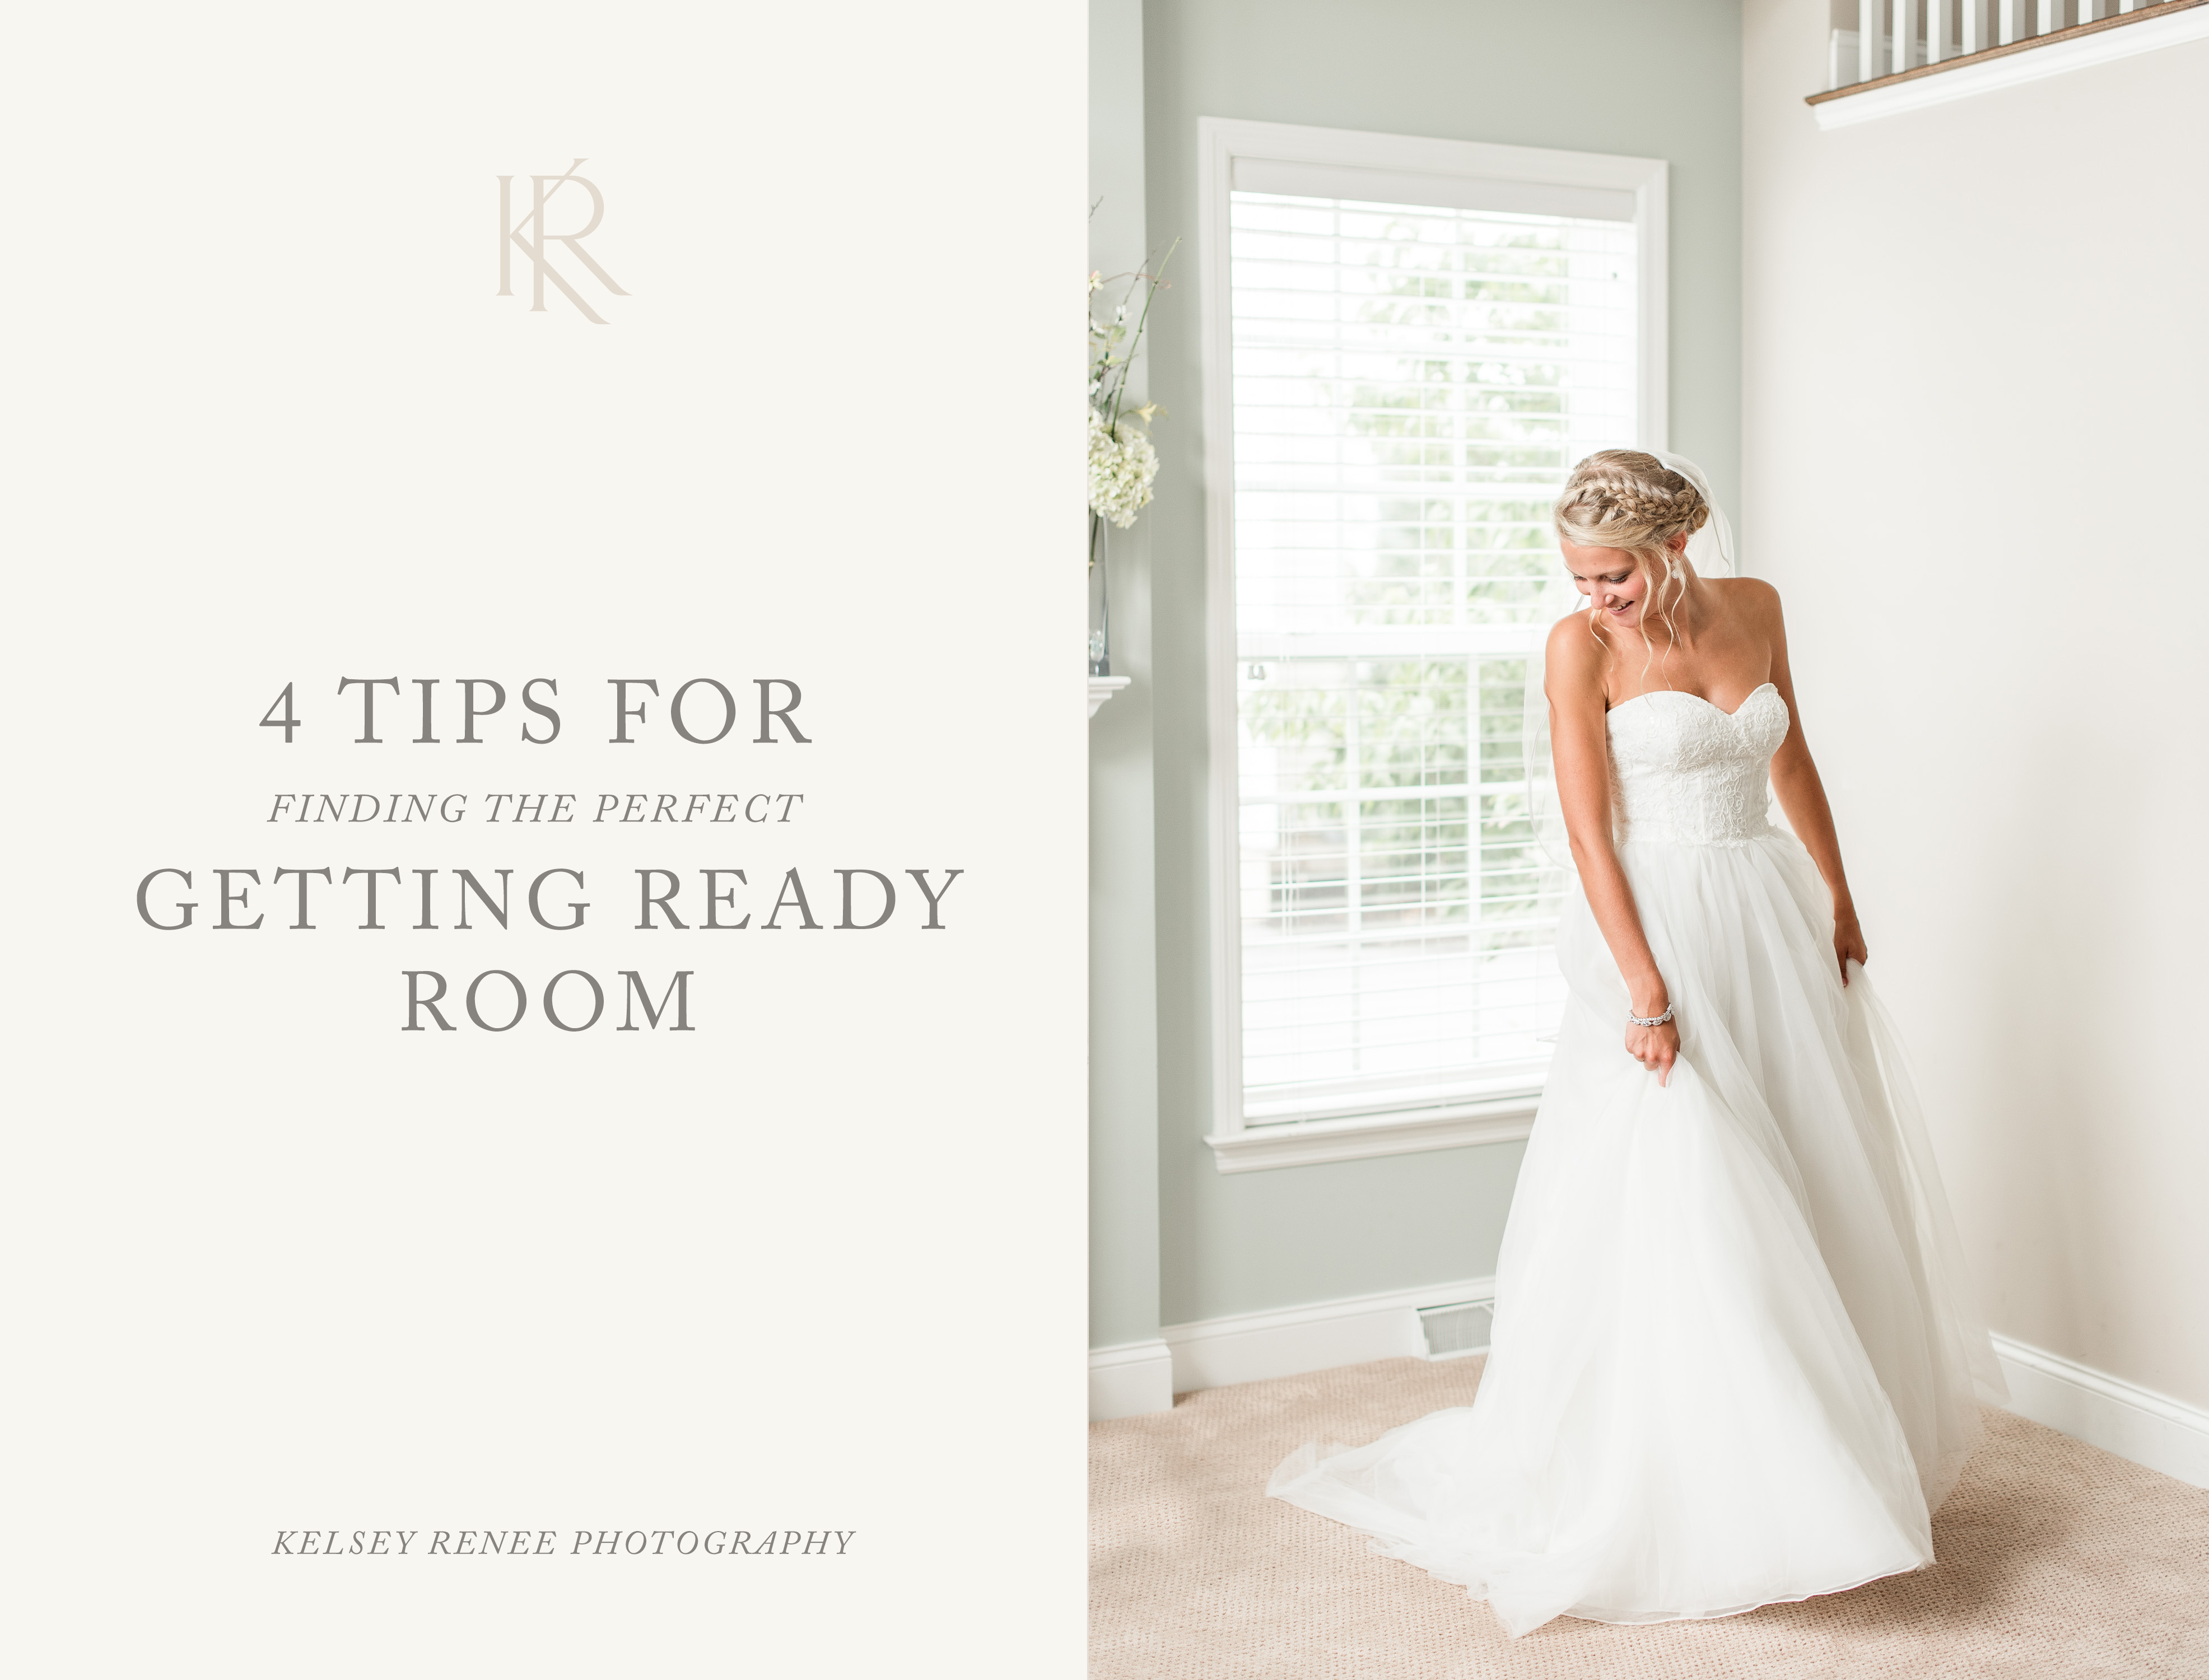 4 Tips for Finding the Perfect Getting Ready Room